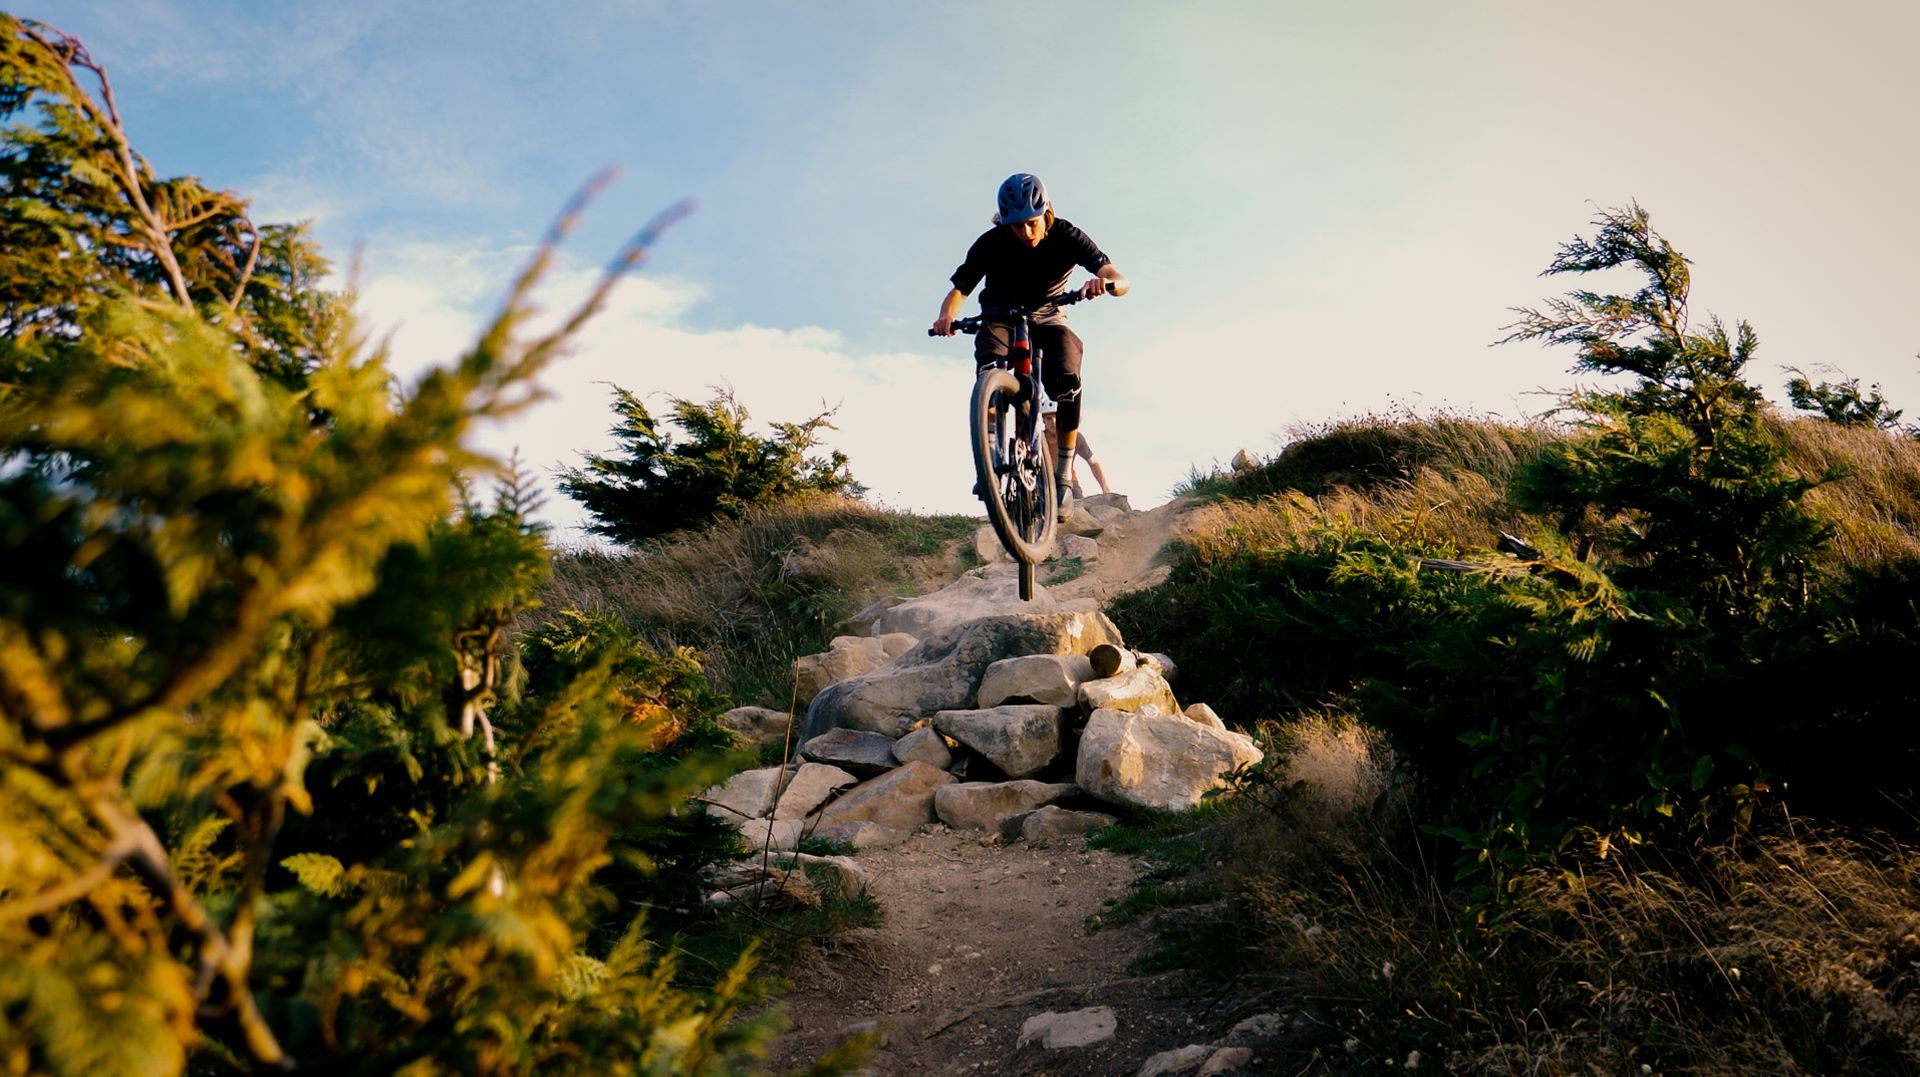 Young man riding mountainbike down a gnarly trail with lots of rocks.